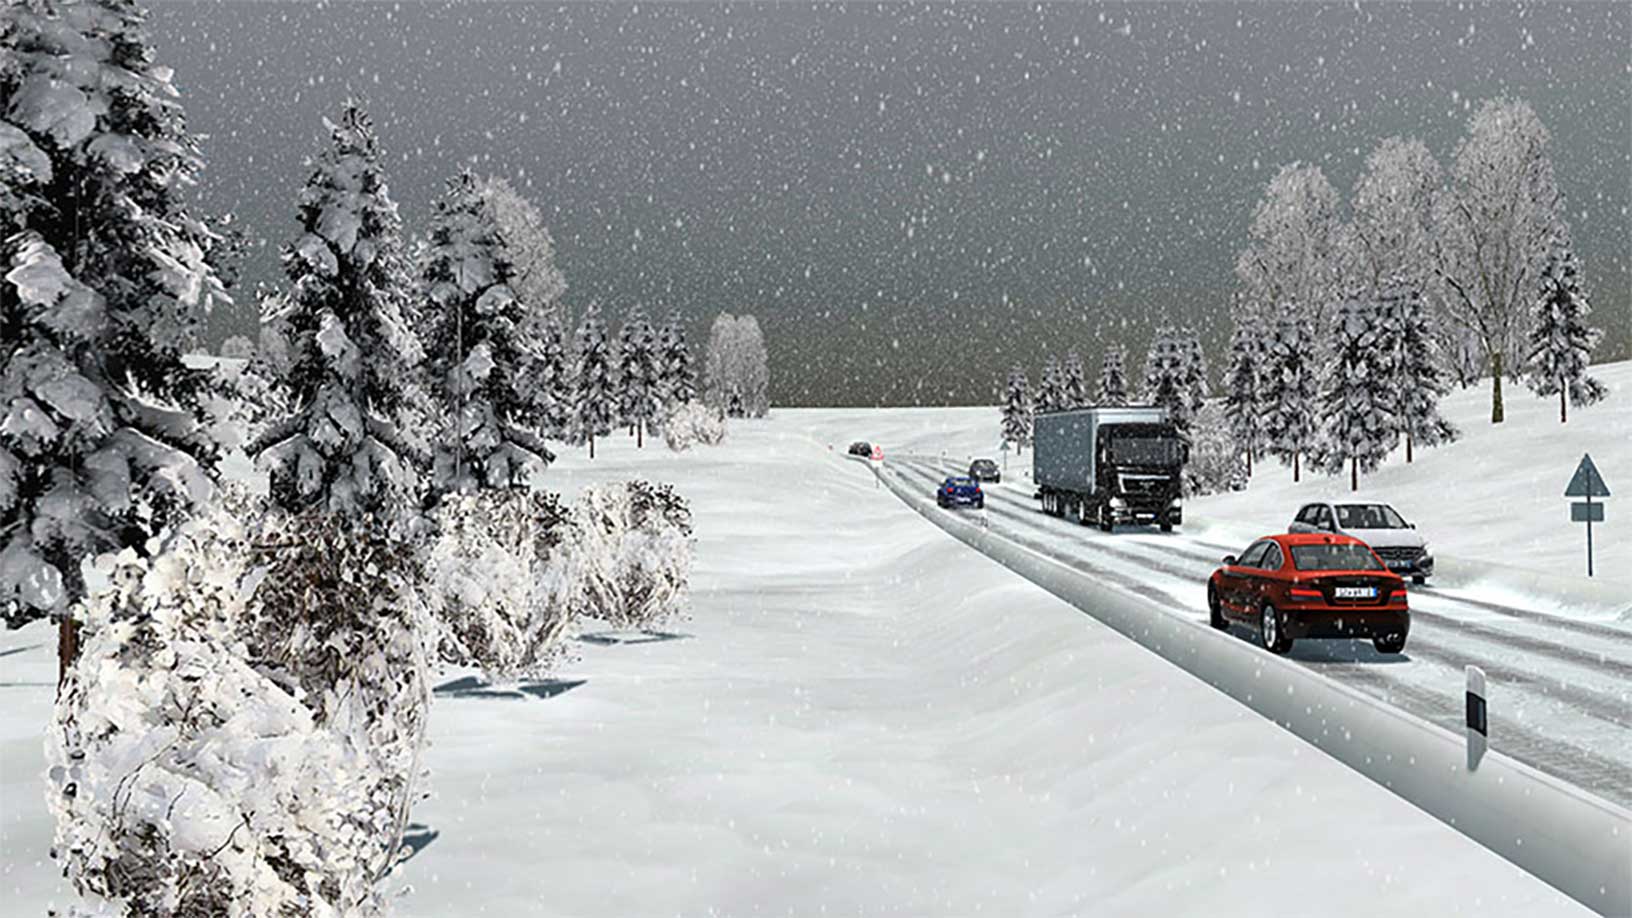 Simulation of vehicles driving in cold, snowy conditions